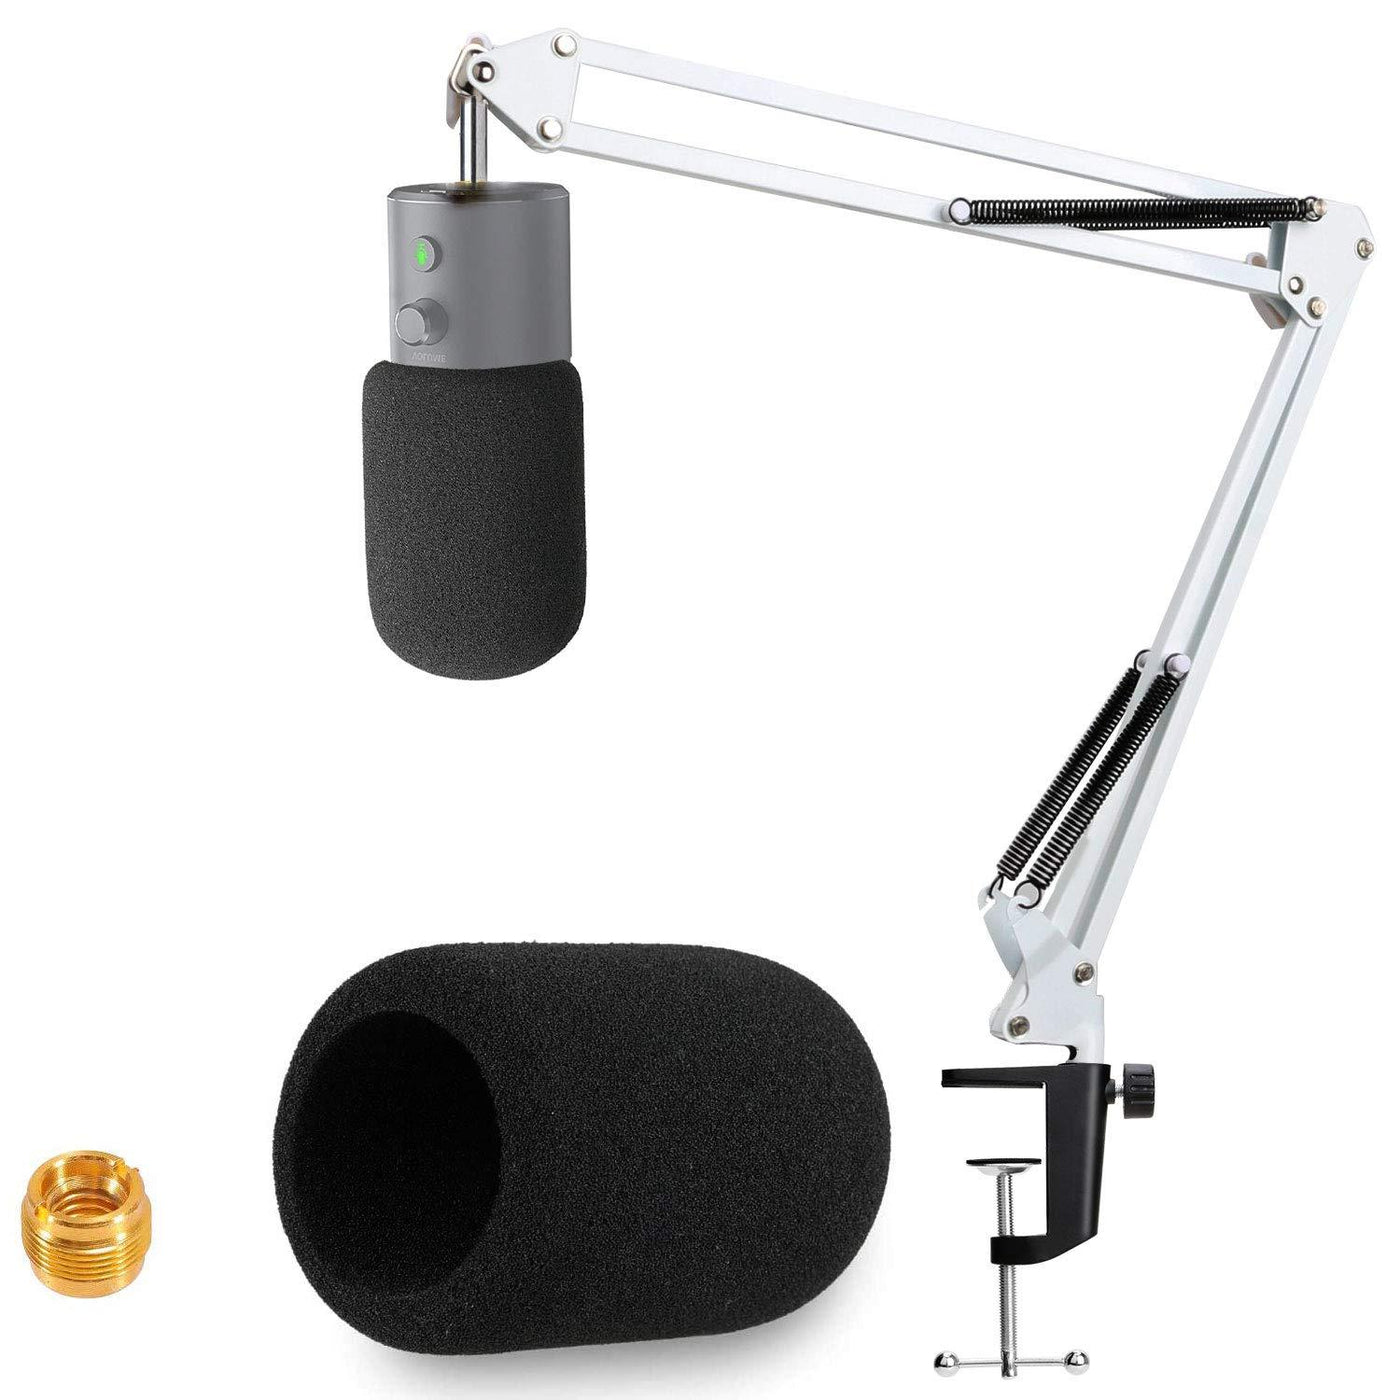  For Razer Seiren Mini Mic White Boom Arm, Mic Desk White Stand  Compatible with razer seiren mini, Microphone White Boom Arm for Gaming,  Home and Office Recording : Musical Instruments